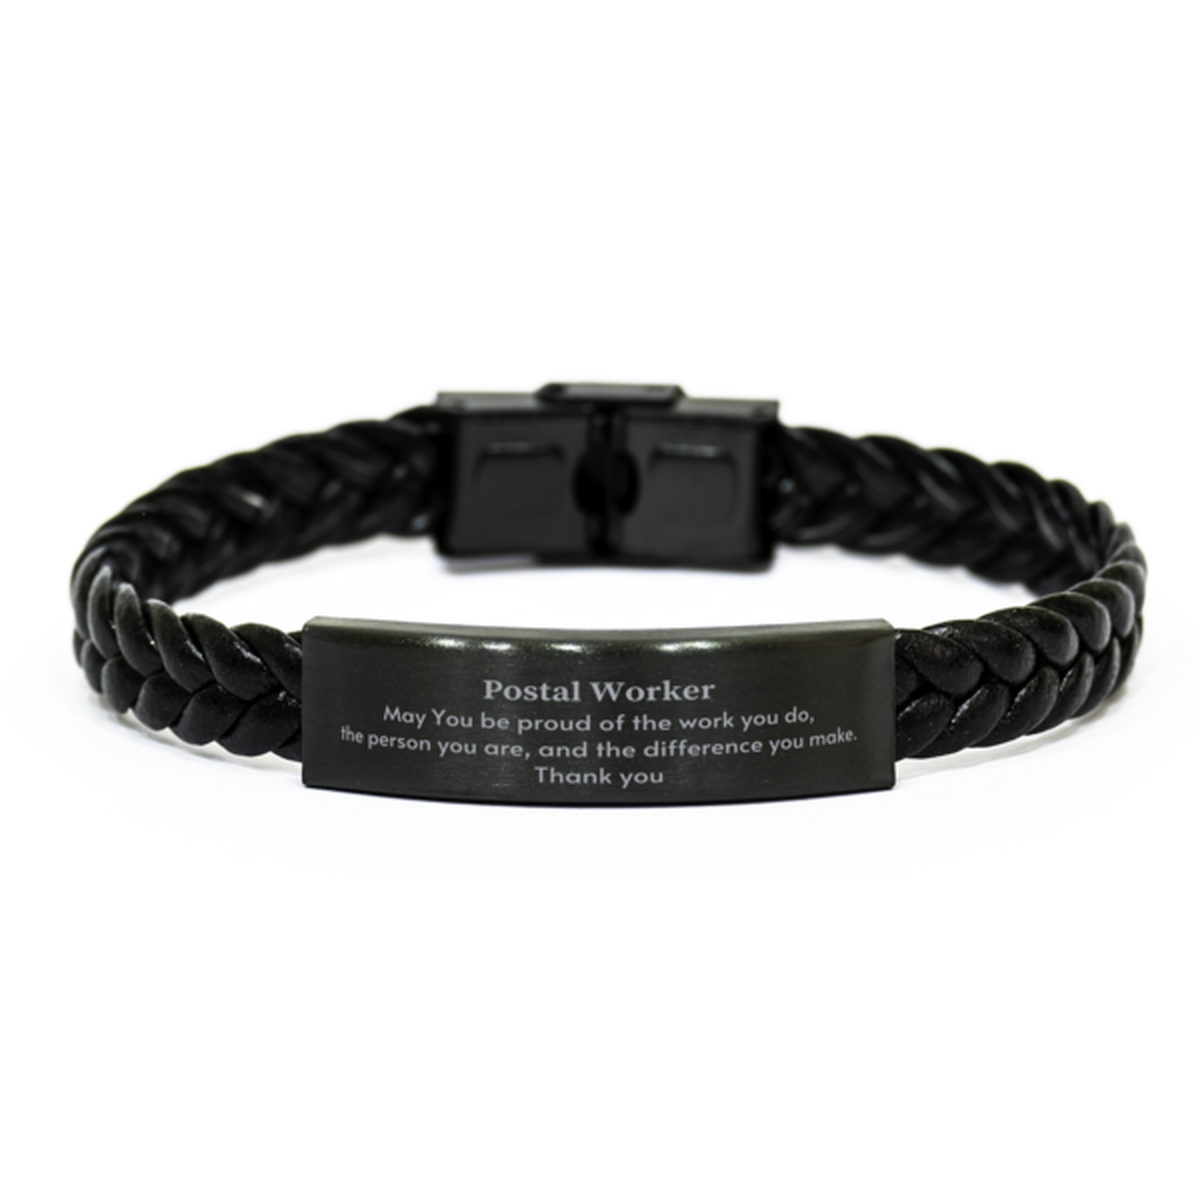 Heartwarming Braided Leather Bracelet Retirement Coworkers Gifts for Postal Worker, Postal Worker May You be proud of the work you do, the person you are Gifts for Boss Men Women Friends